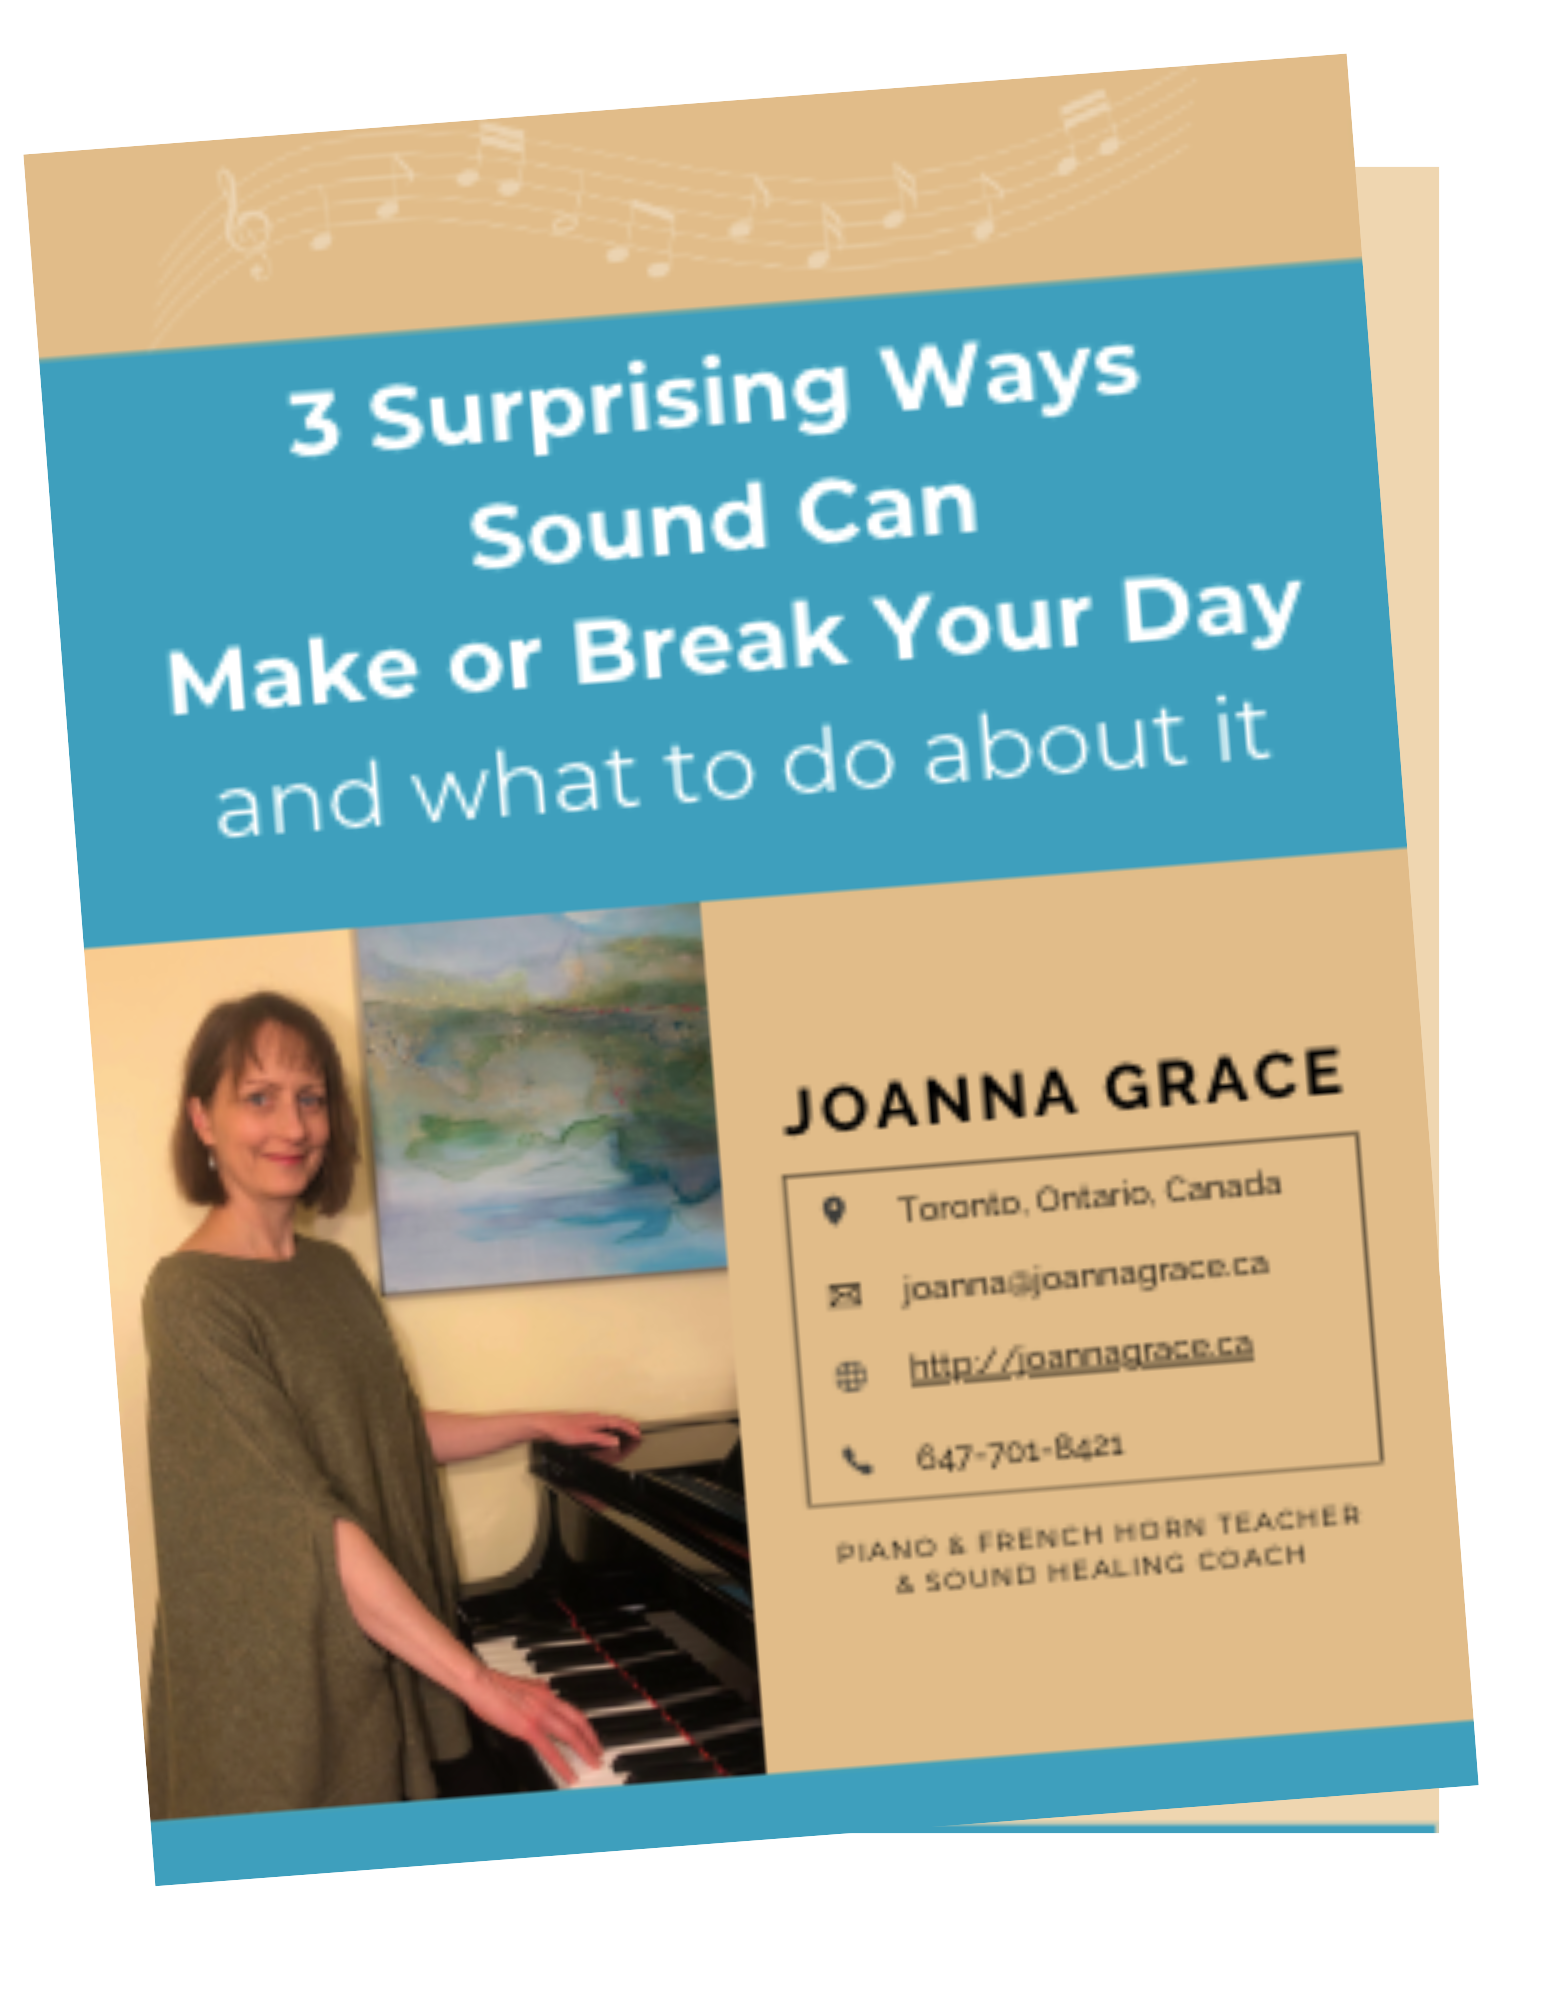 3 Surprising Ways Sound Can Make or Break Your Day (and what to do about it)